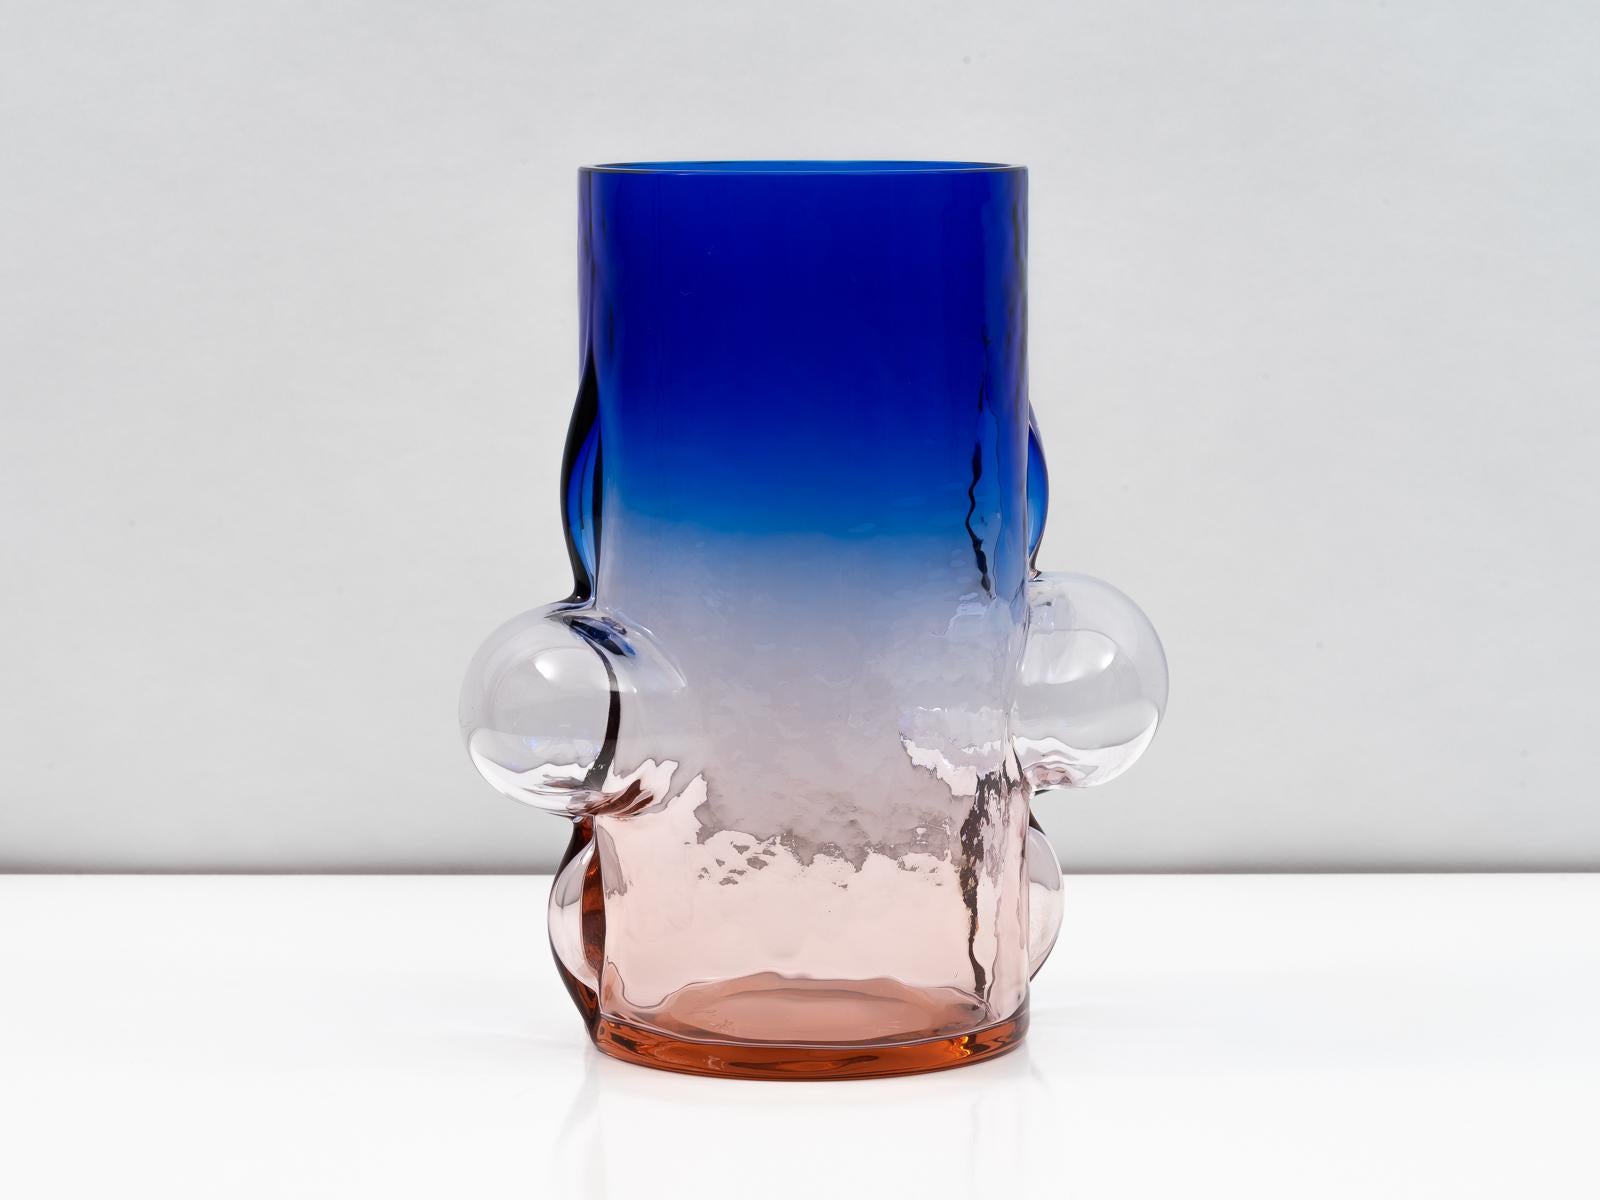 An exceptional vase designed by Toni Zuccheri for VeArt in 1988. The intensely-colored body transitions from purplish-pink at the base, to clear at its center, and then a deep ultramarine blue at its apex. Demonstrating the skill and craft of